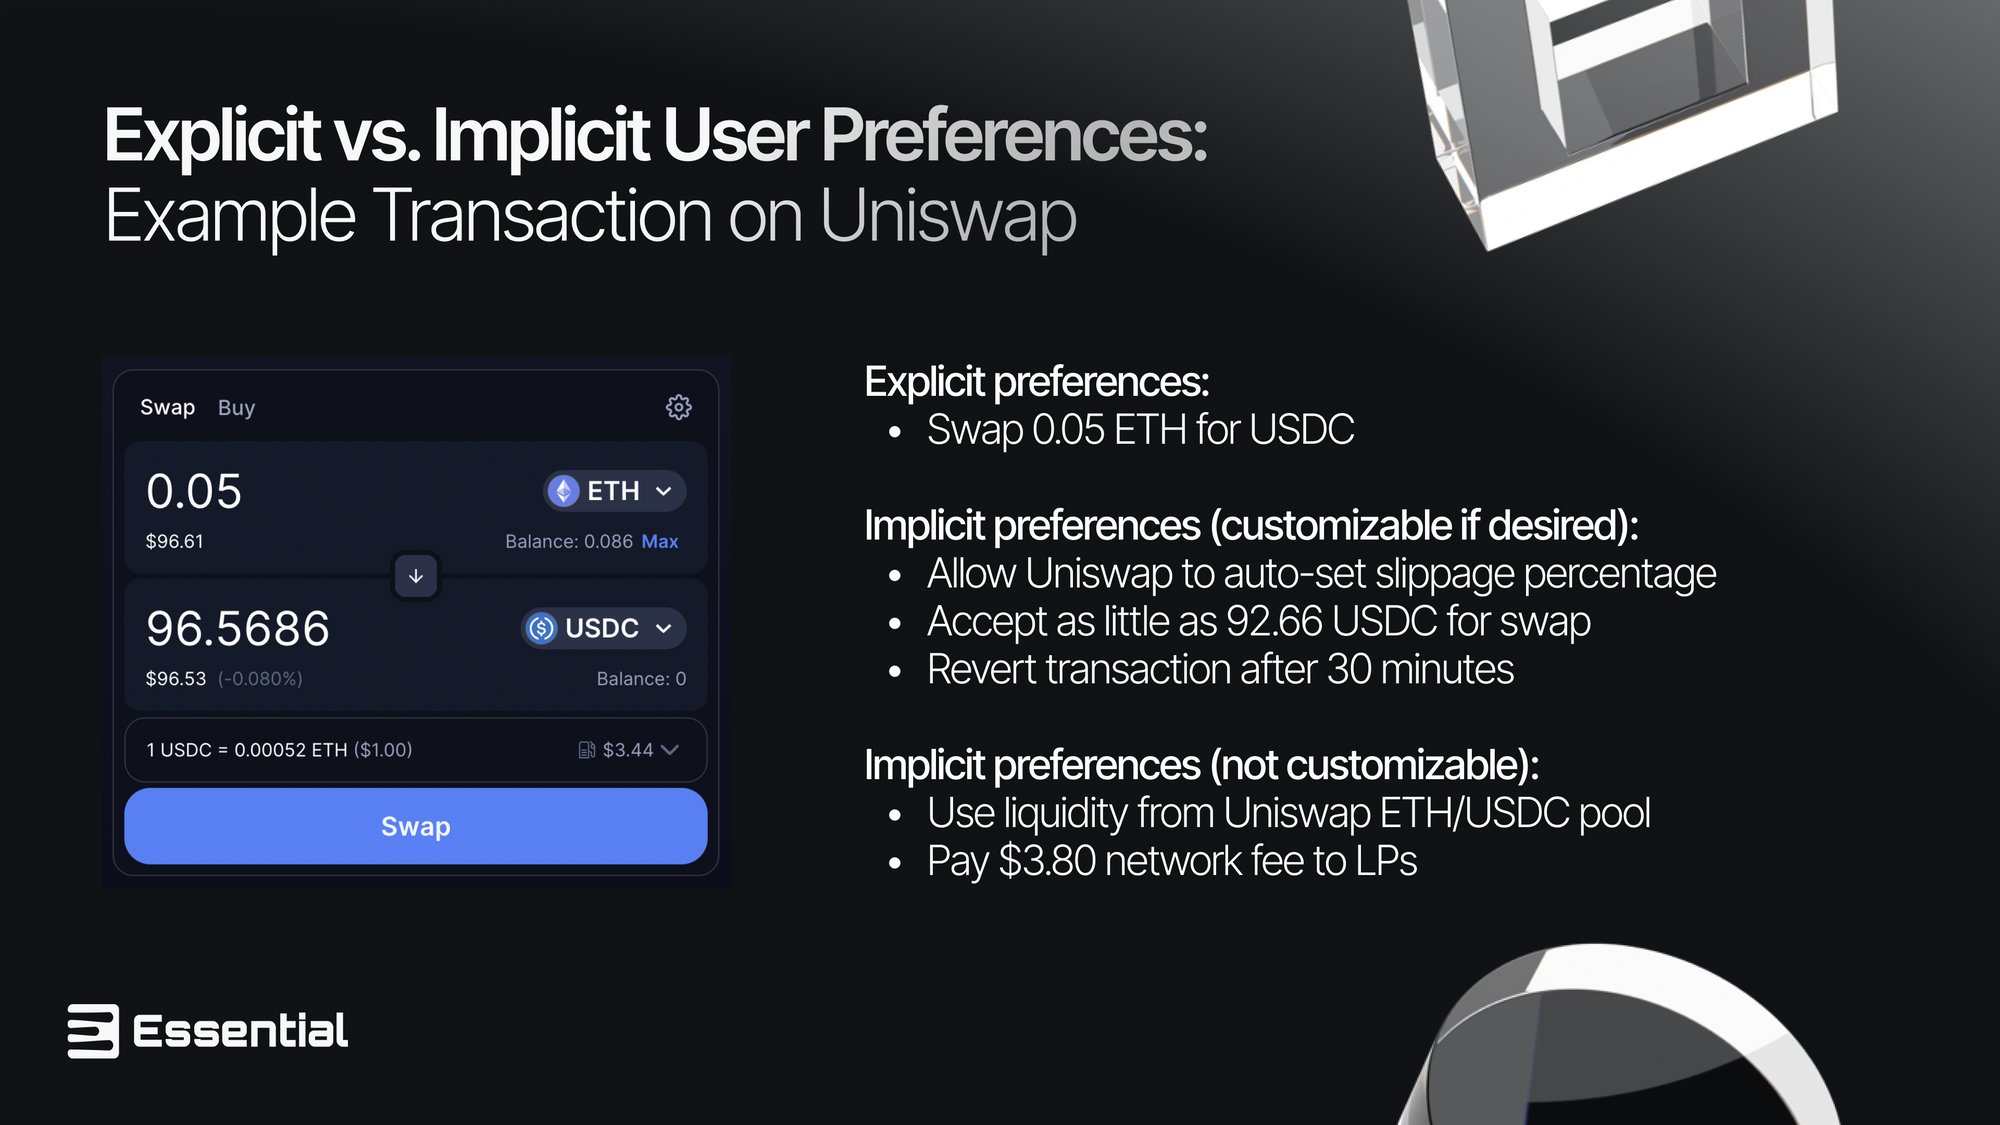 Explicit vs. implicit user preferences: example transaction on Uniswap. Explicit preferences: Swap 0.05 ETH for USDC. Implicit preferences (customizable if desired): Allow Uniswap to auto-set slippage percentage. Accept as little as 92.66 USDC for swap. Revert transaction after 30 minutes. Implicit preferences (not customizable): Use liquidity from Uniswap ETH/USDC pool.Pay $3.80 network fee to LPs.